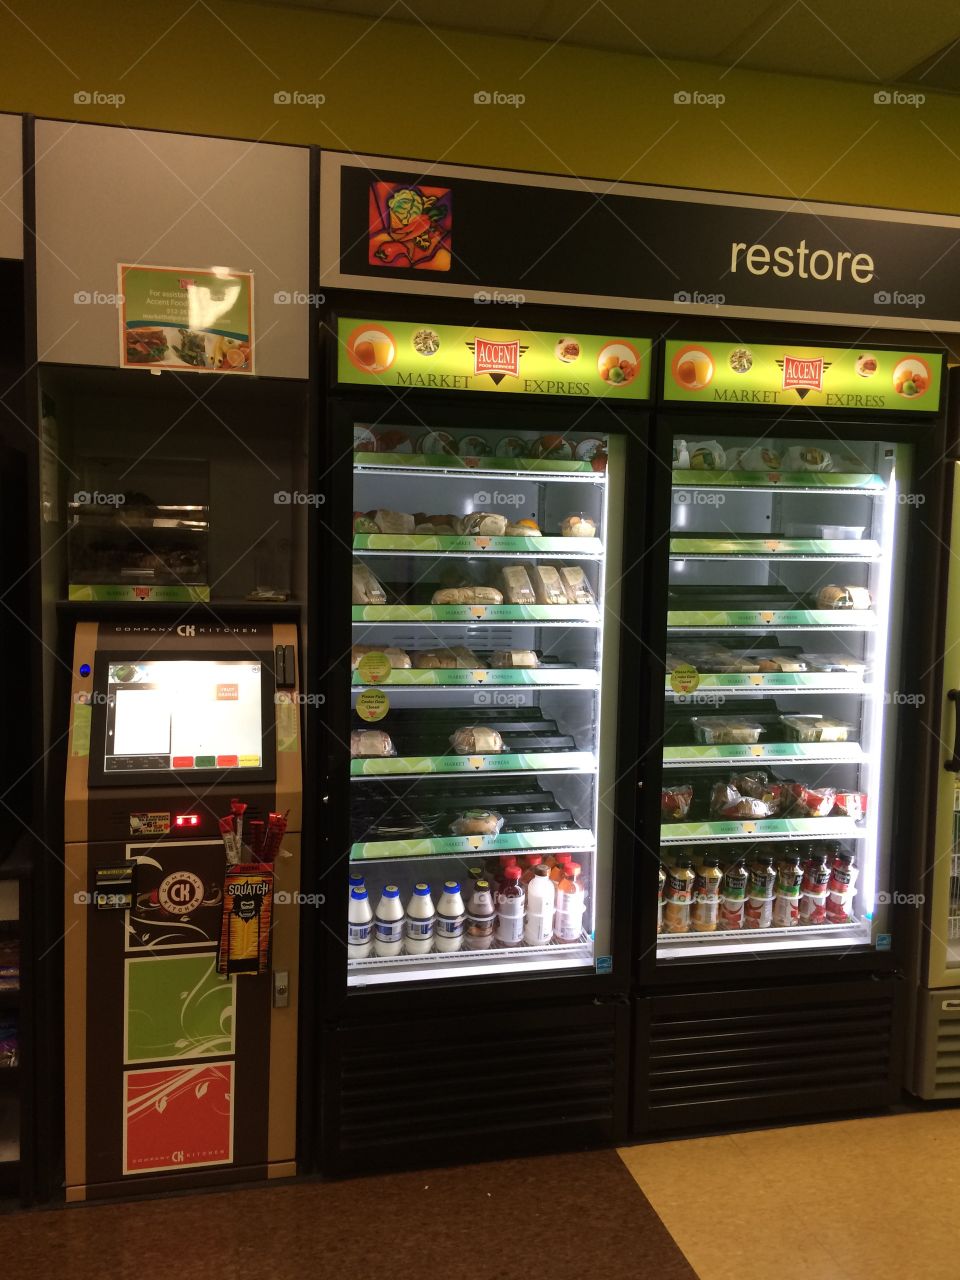 New wave of the future open- vending machines!
